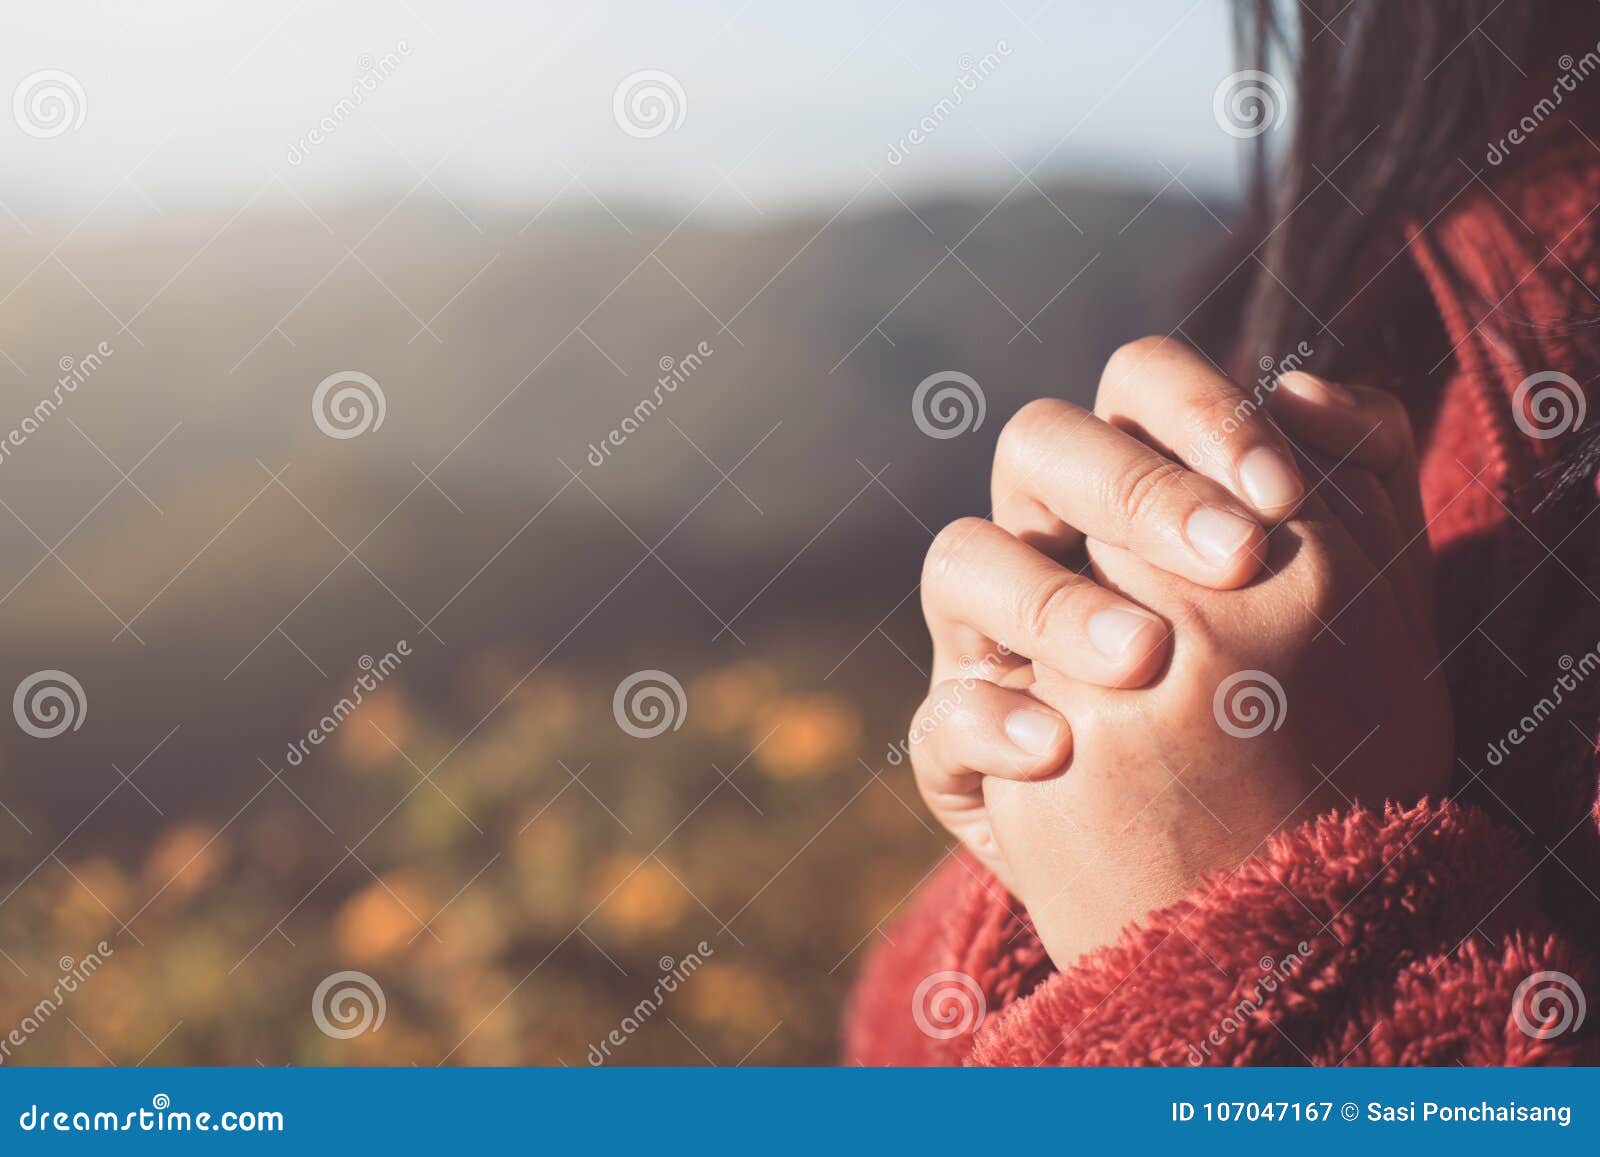 woman hands folded in prayer in beautiful nature background